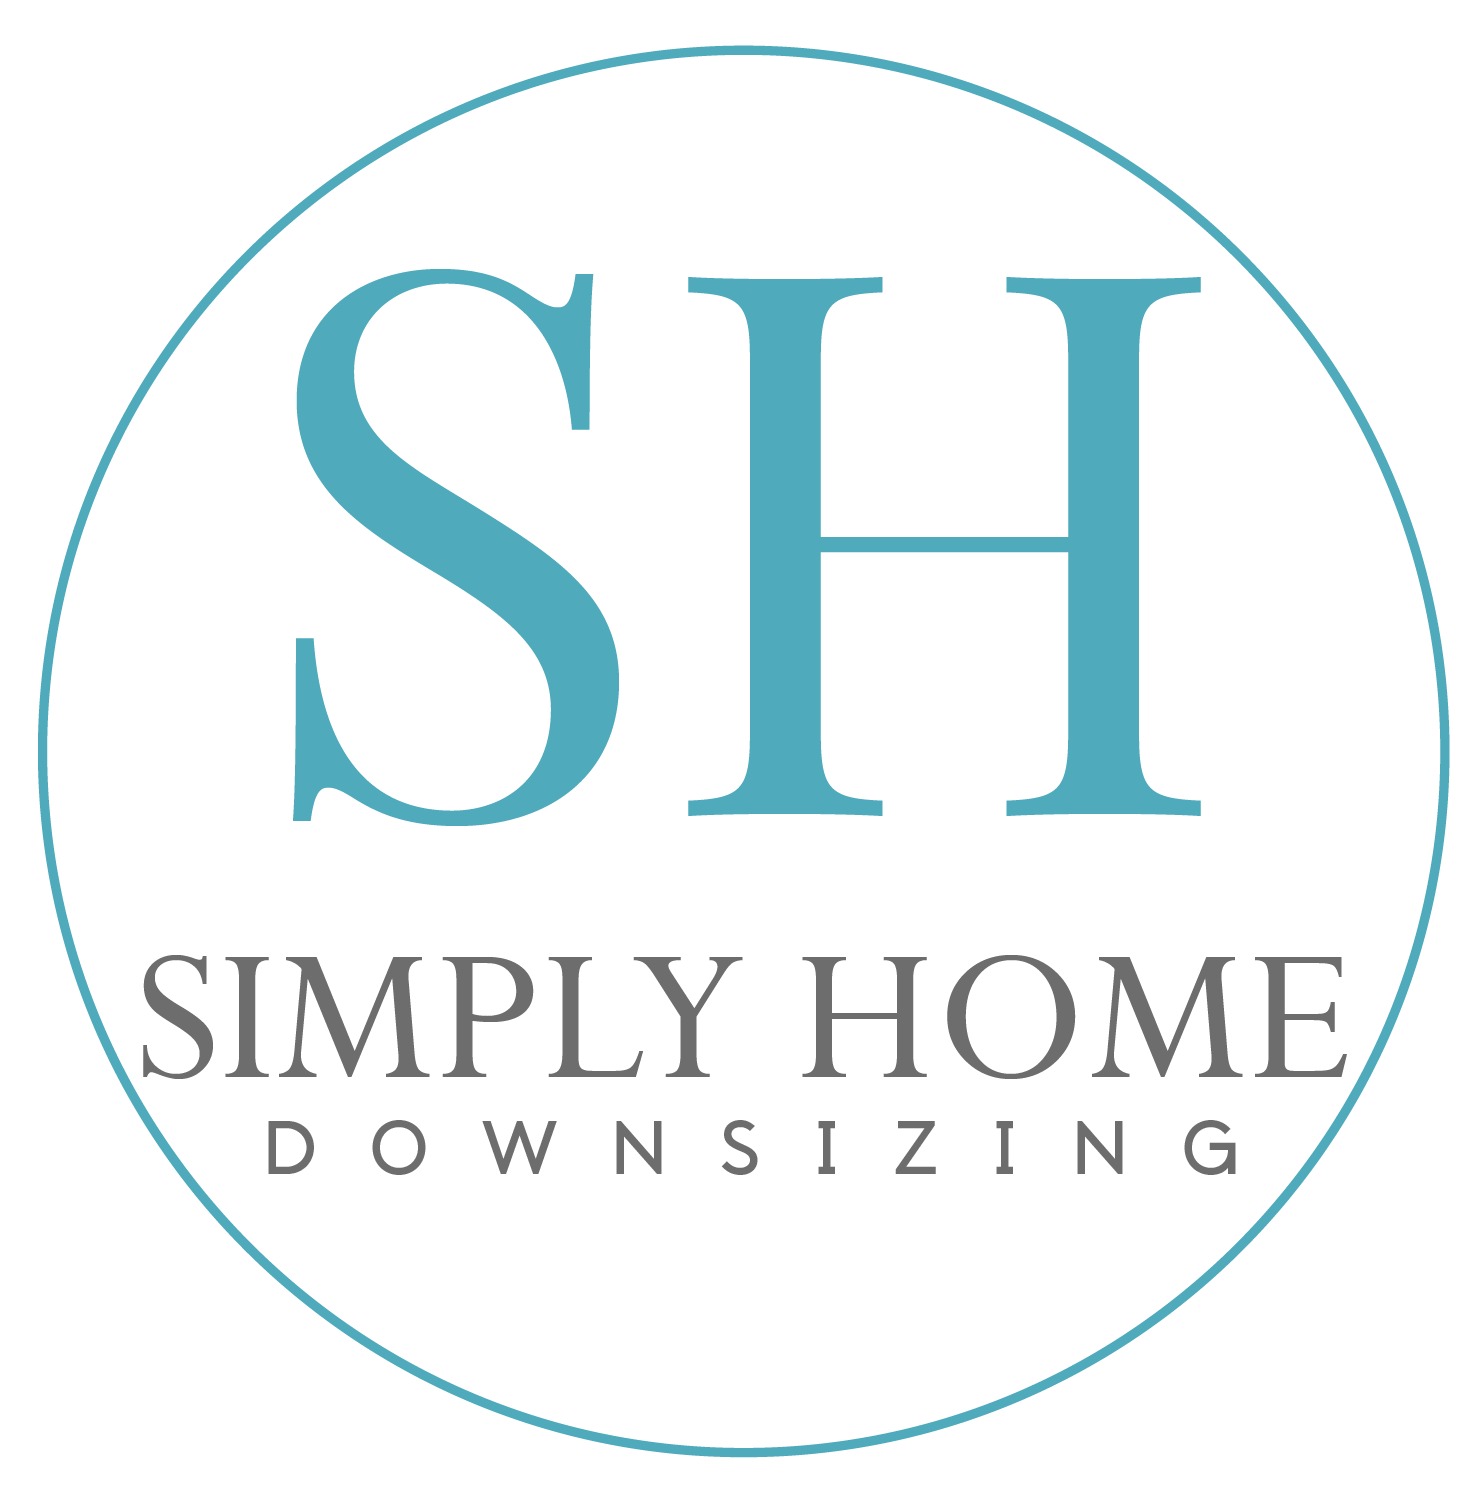 Simply Home Downsizing's logo